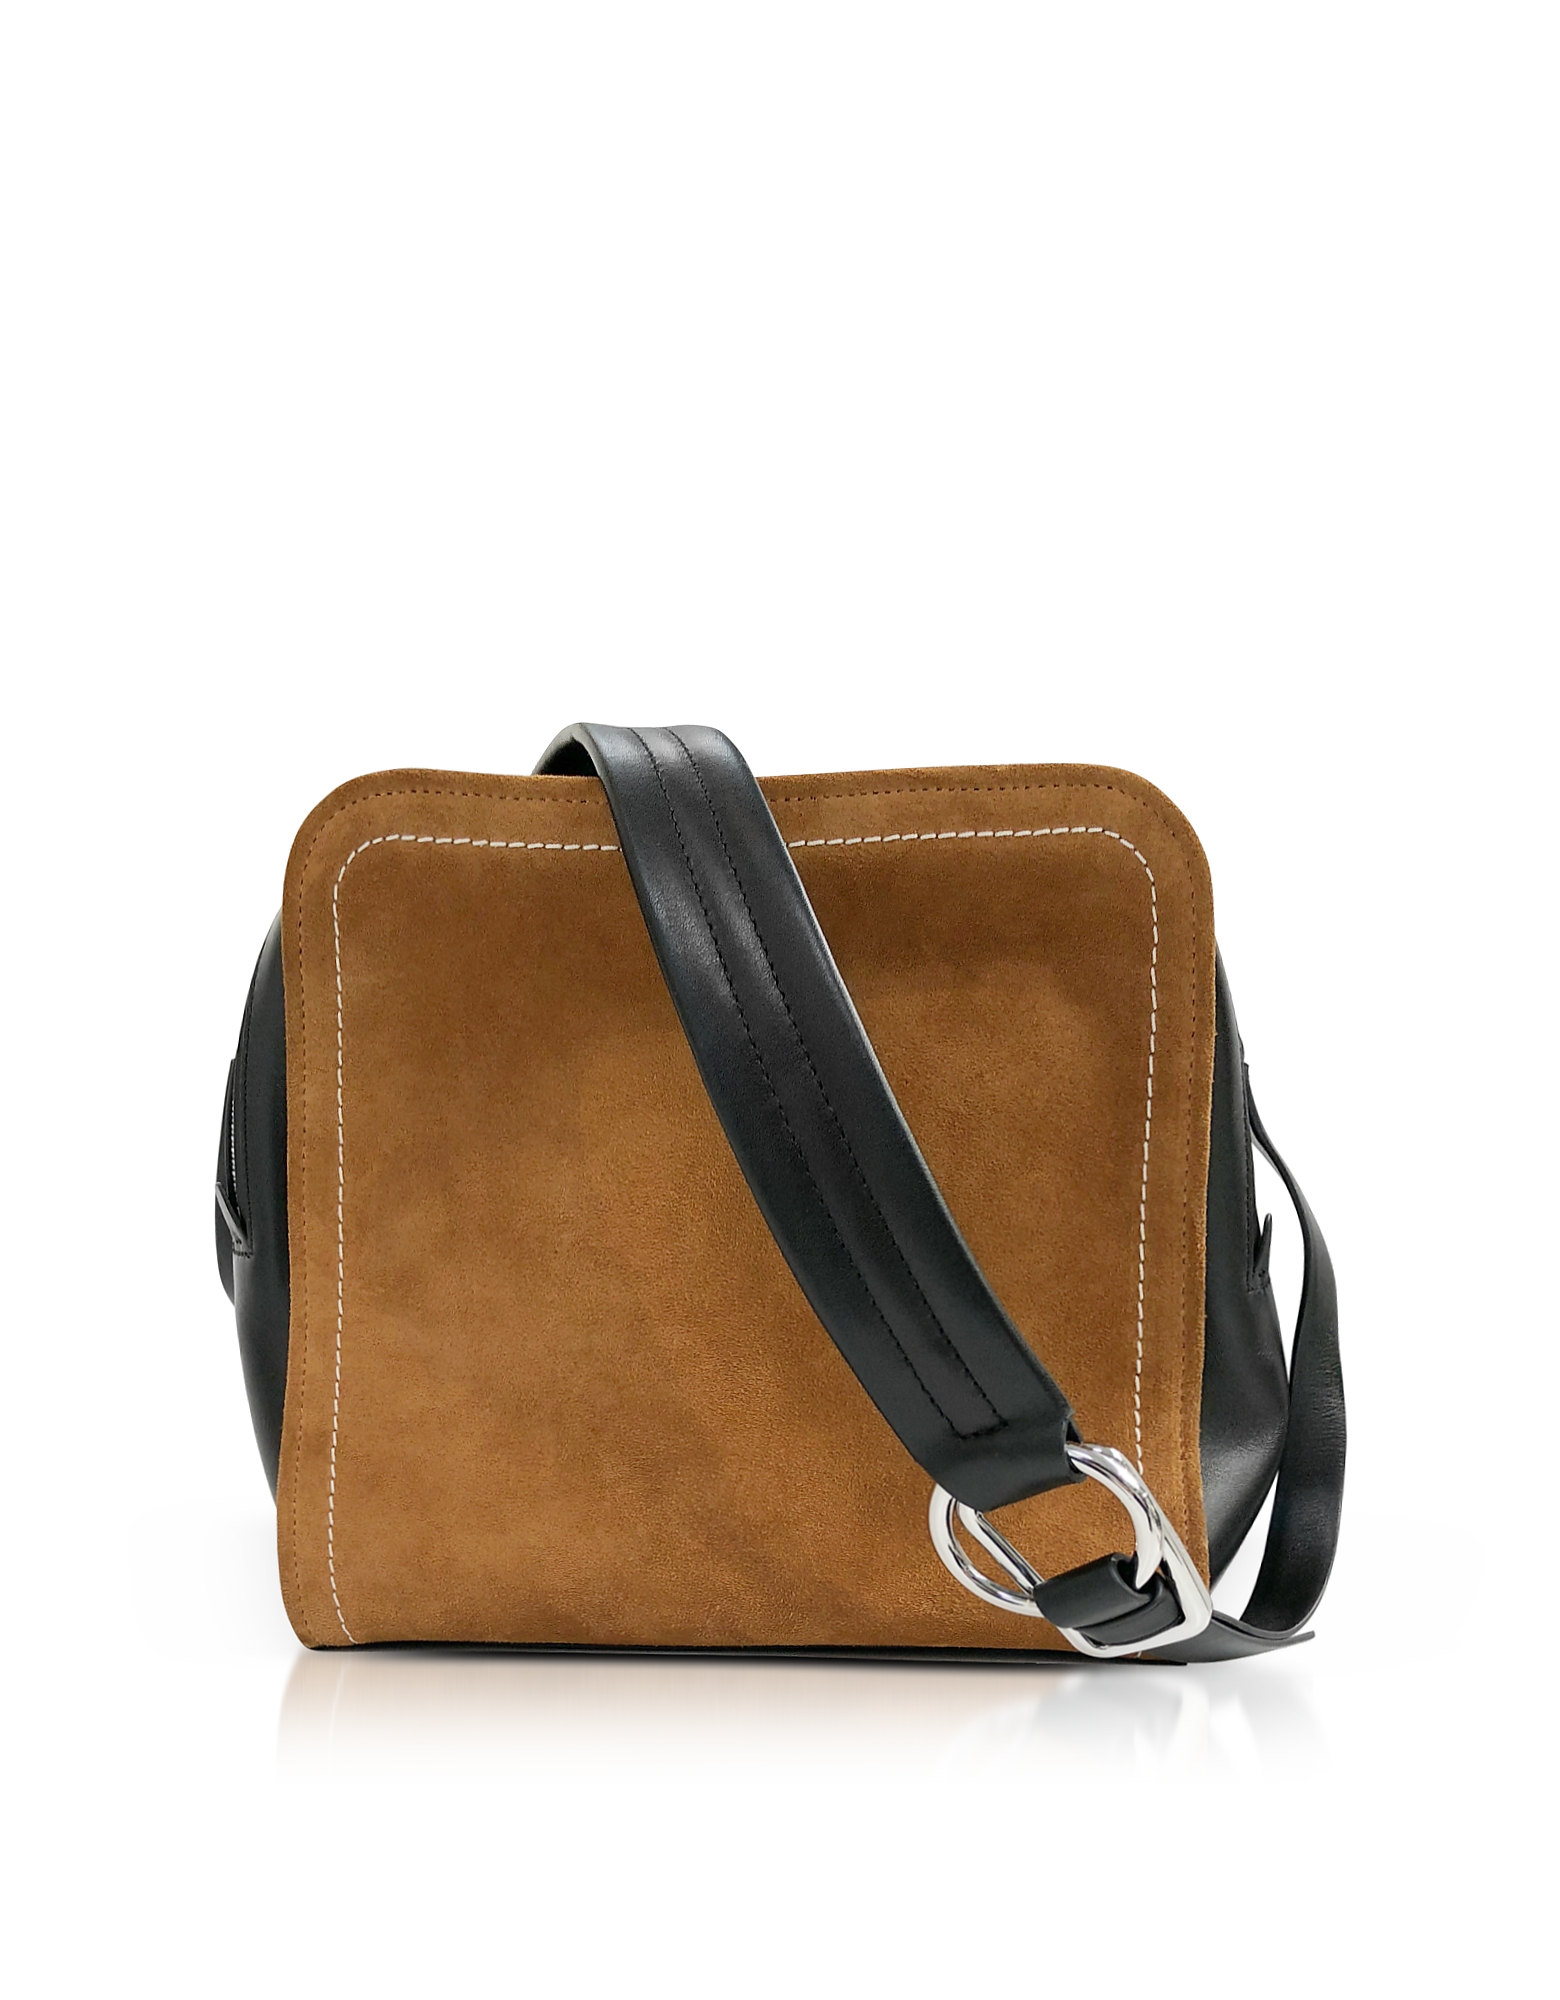 

Black Leather and Cinnamon Suede Hudson Square Crossbody Bag